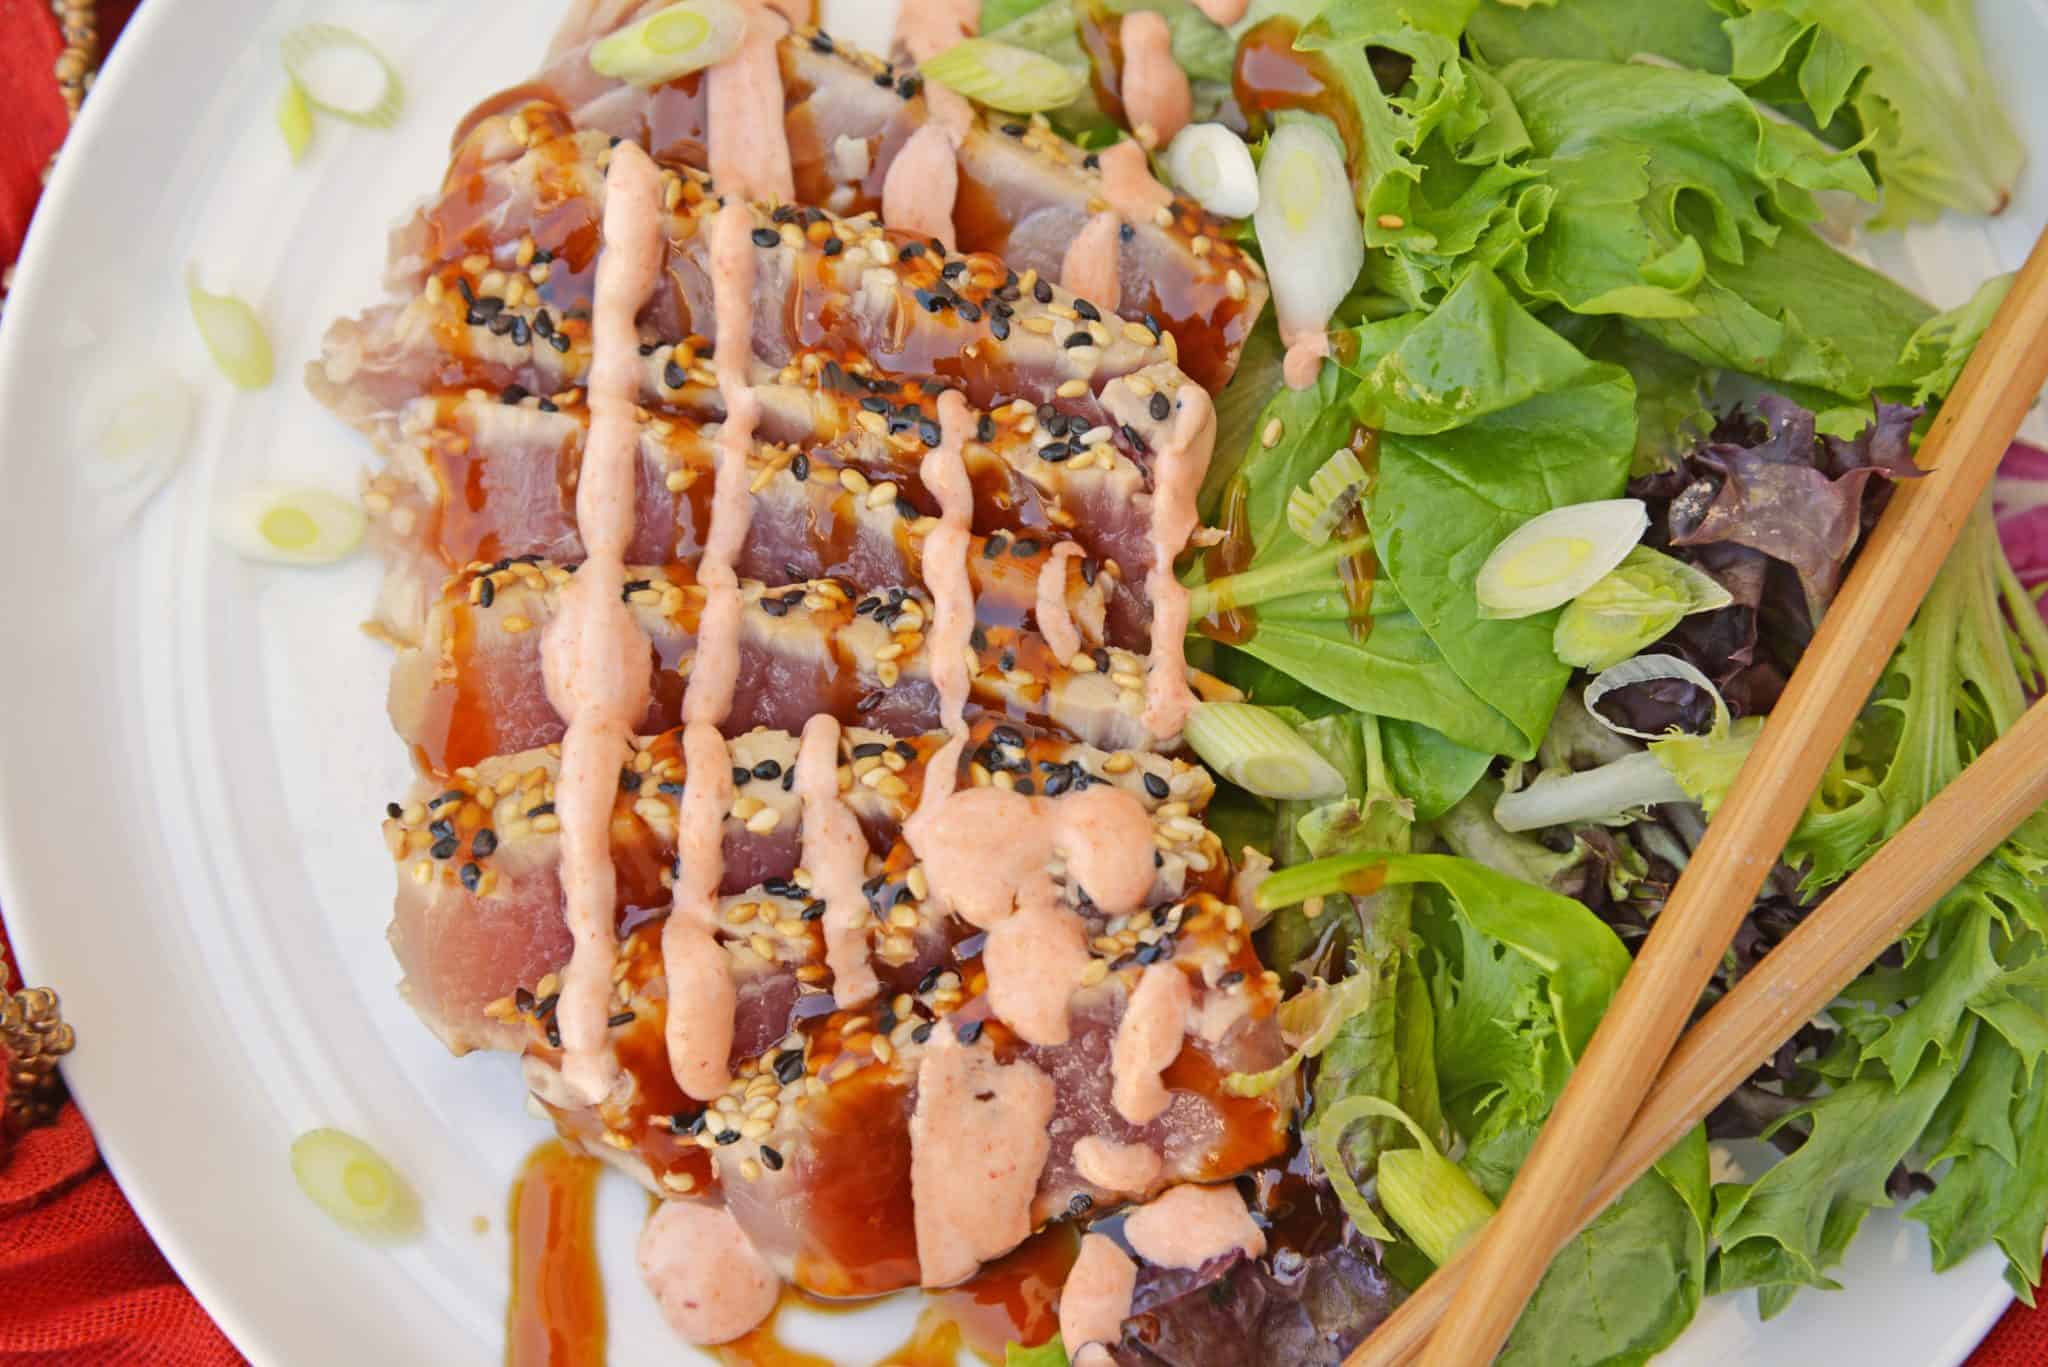 This Teriyaki Tuna recipe brings a delicious and healthy meal to the table in just over 20 minutes! This ahi tuna recipe is a quick and easy meal! #teriyakituna #tunarecipes www.savoryexperiments.com